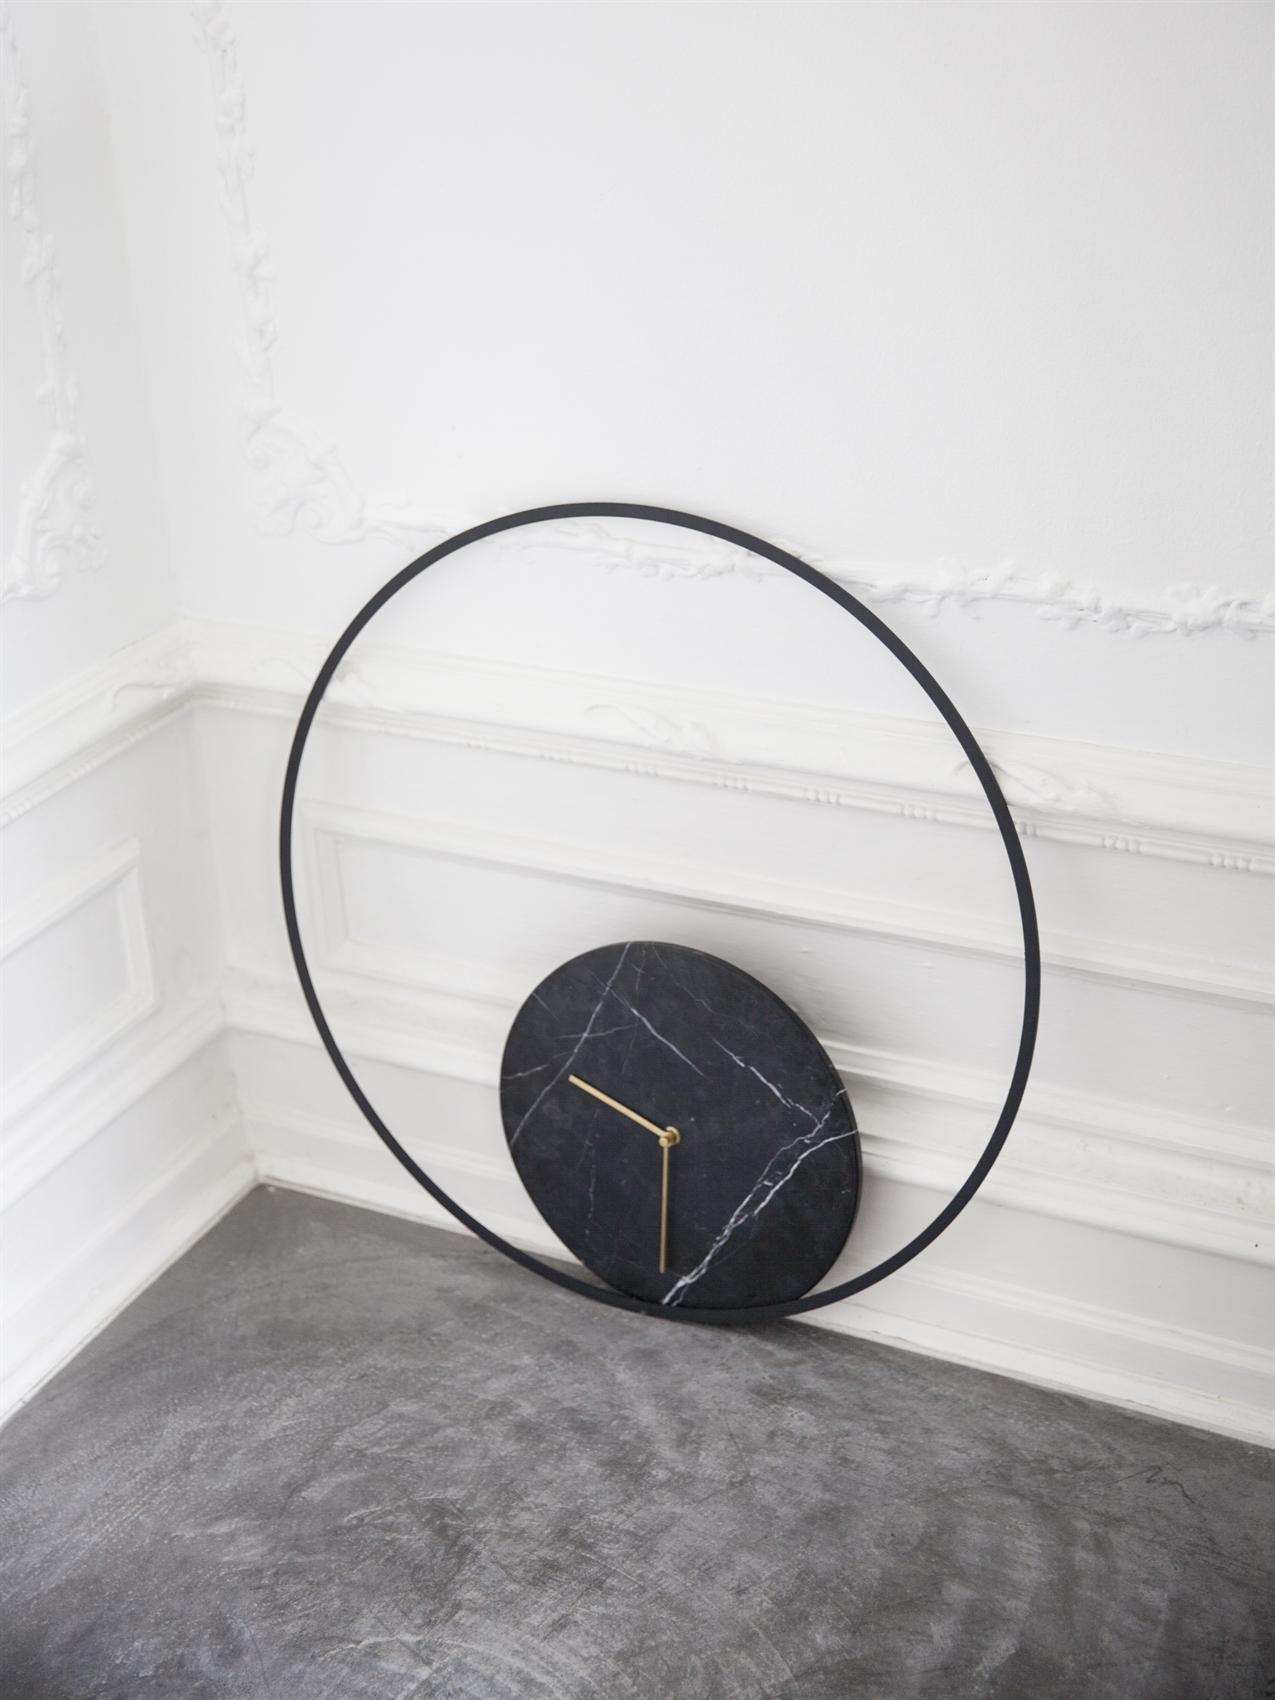 The minimalistic norm wall clock, with its clean lines, embodies the classic simplicity of Scandinavian design. The clock, reduced to the most essential elements, is the latest in a series by Copenhagen studio Norm Architects. In the age of